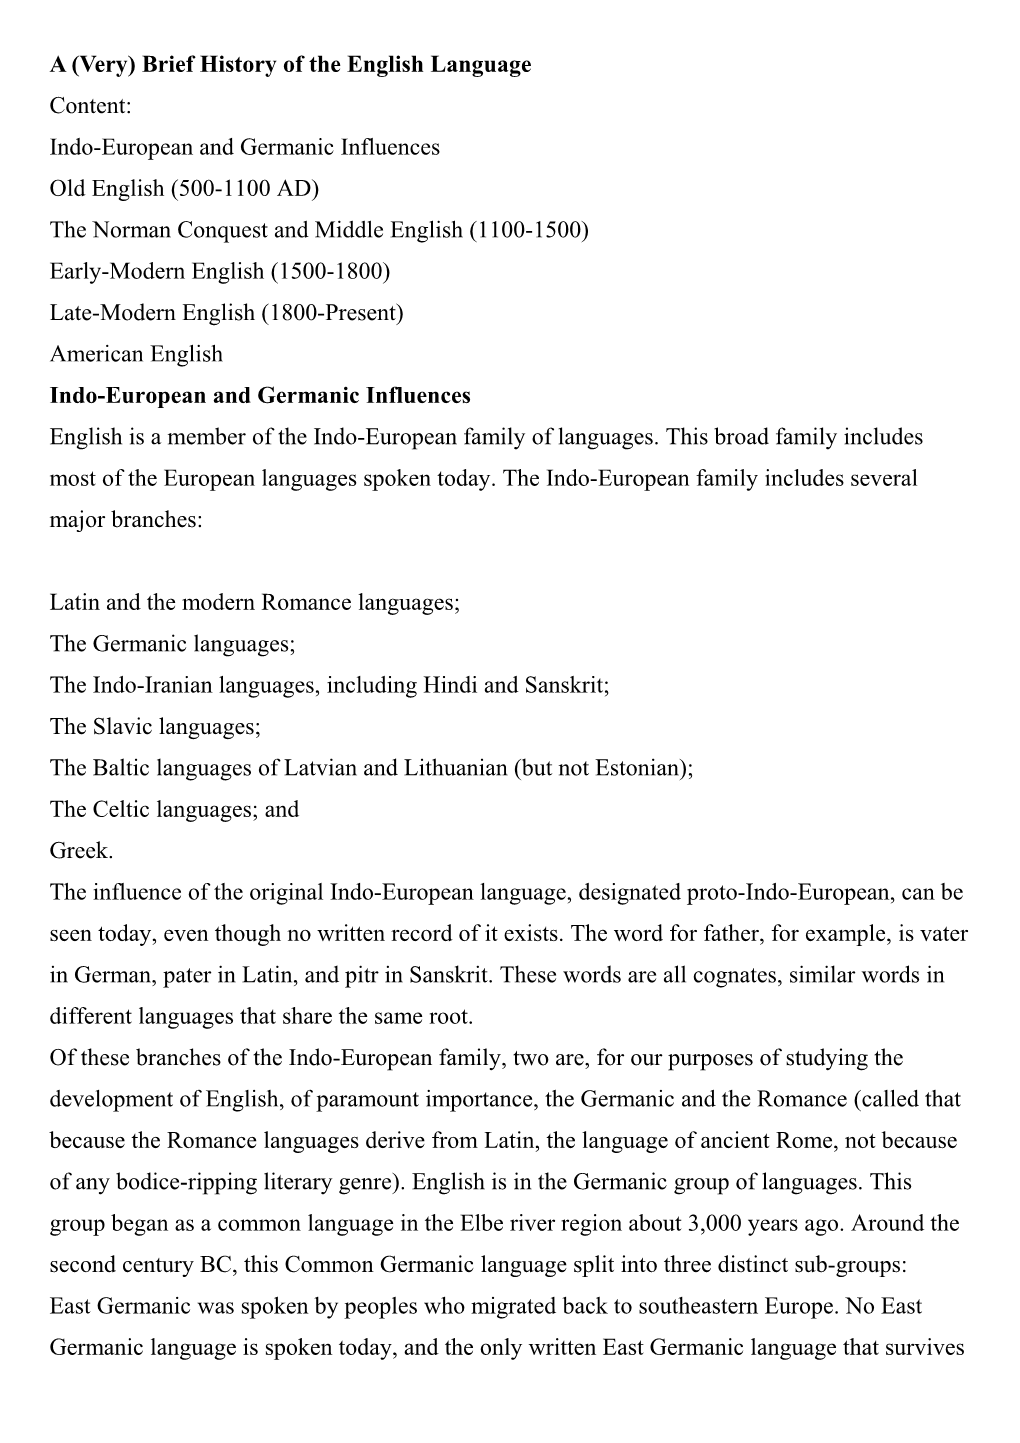 A (Very) Brief History of the English Language